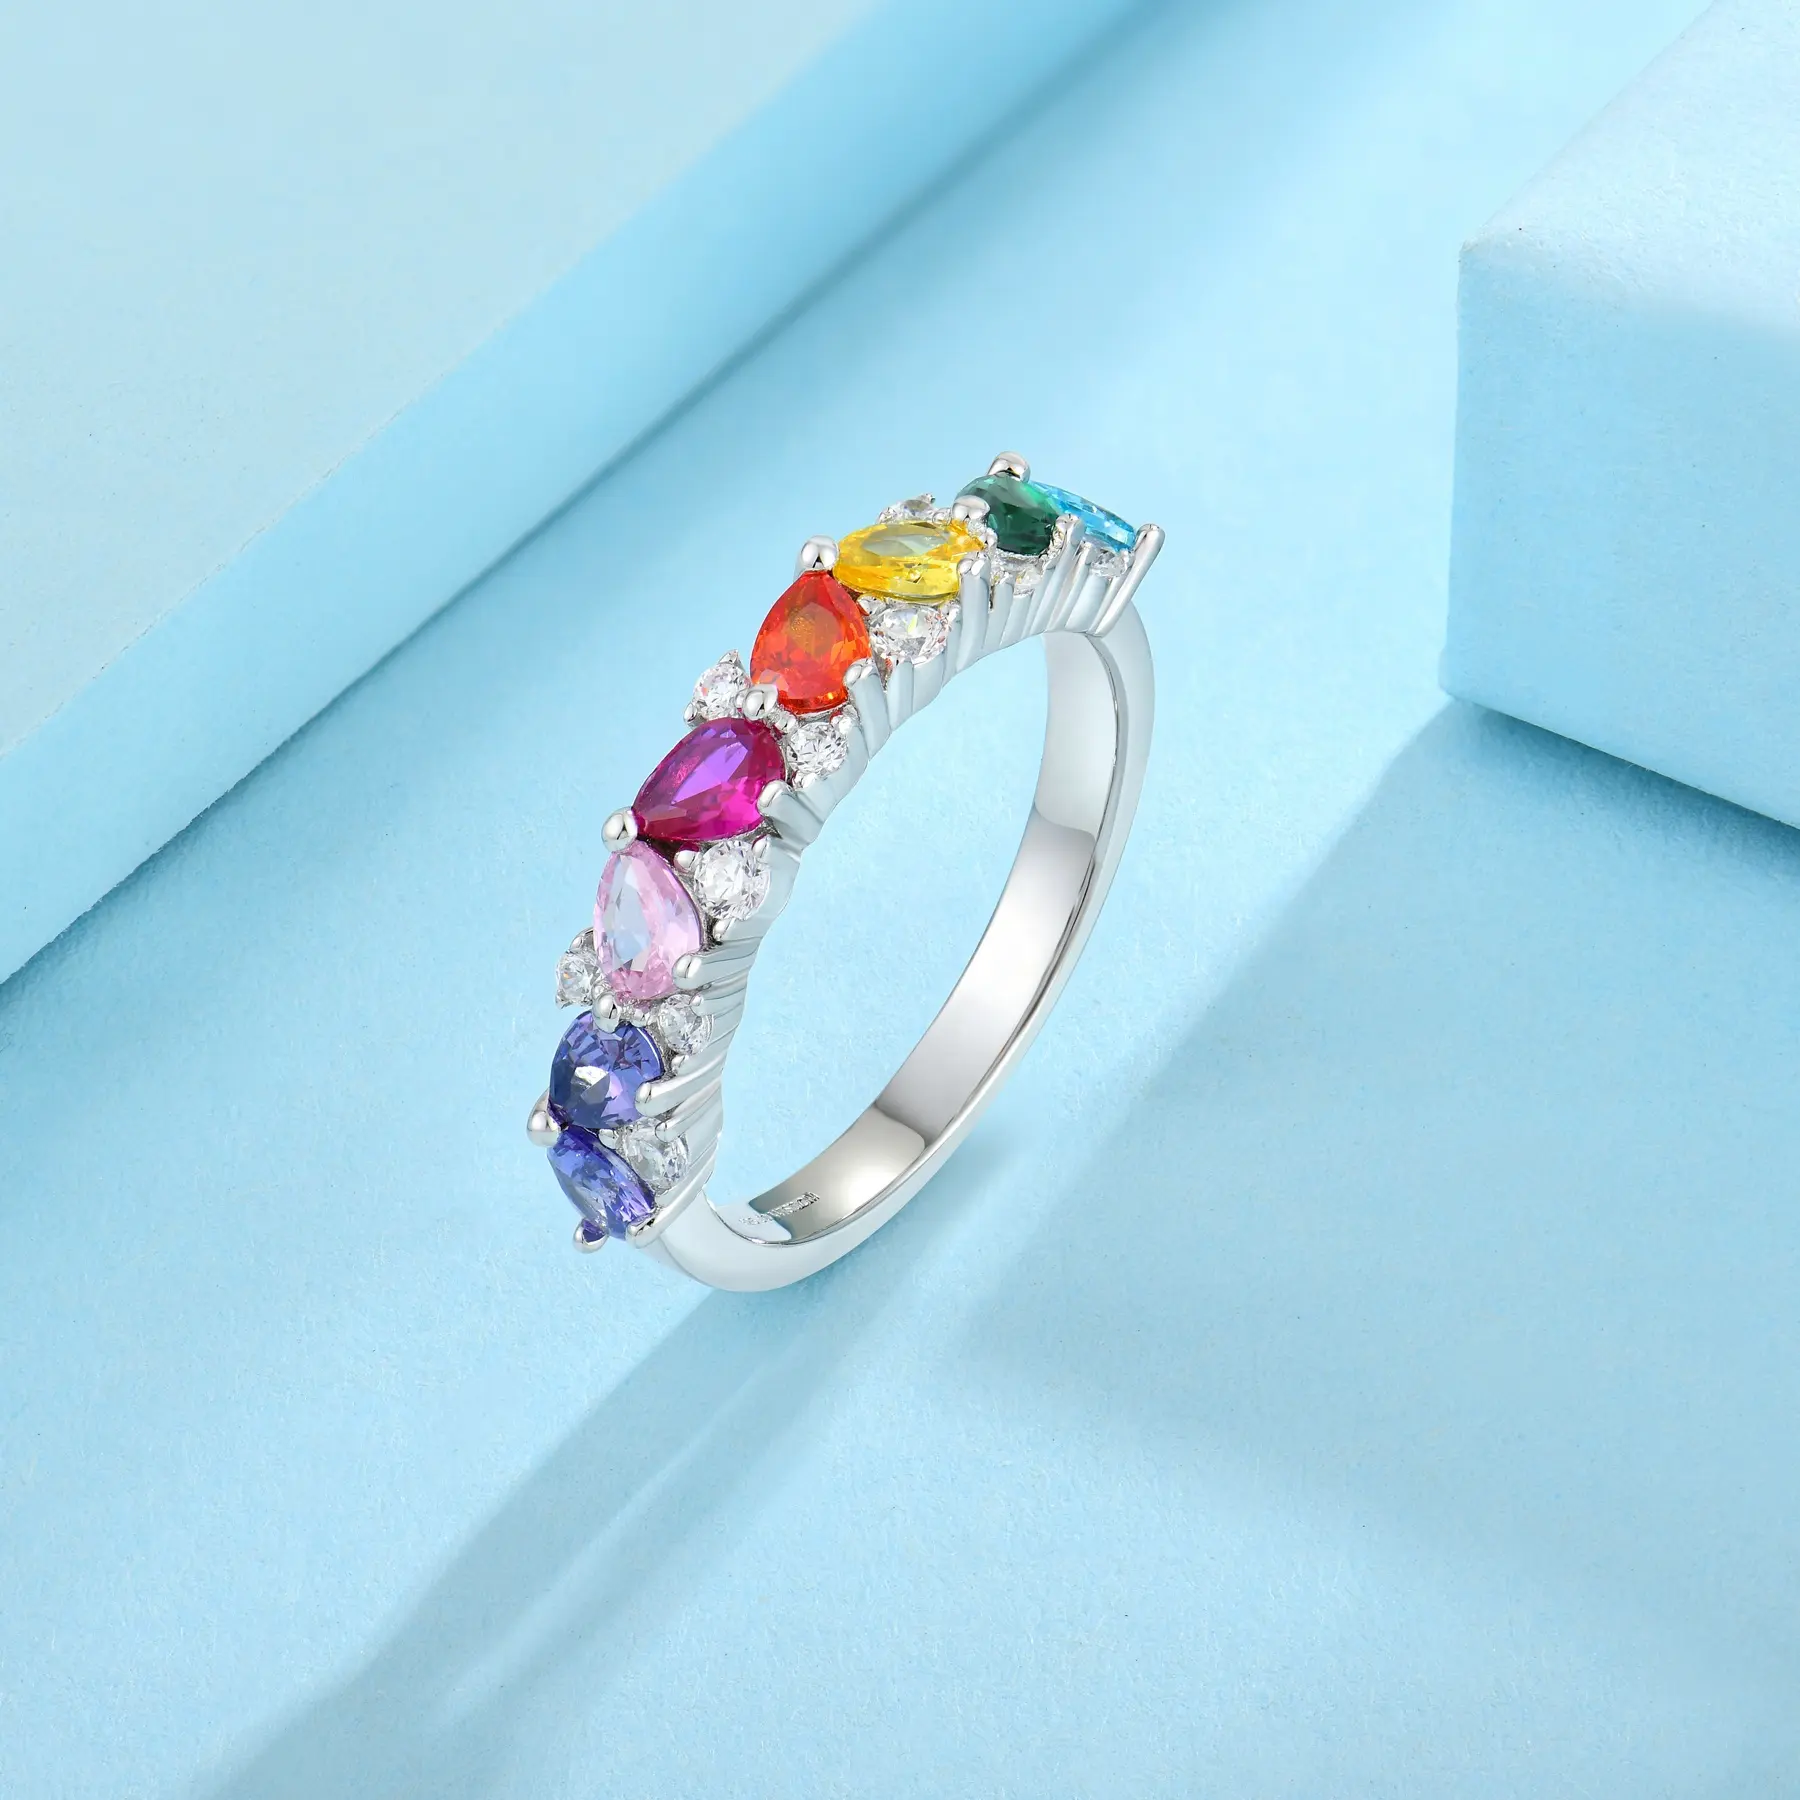 Luxury Trendy Zirconia Rhodium Plated 925 Sterling Silver Women's Fashion Designer Rings With Coloured Stones